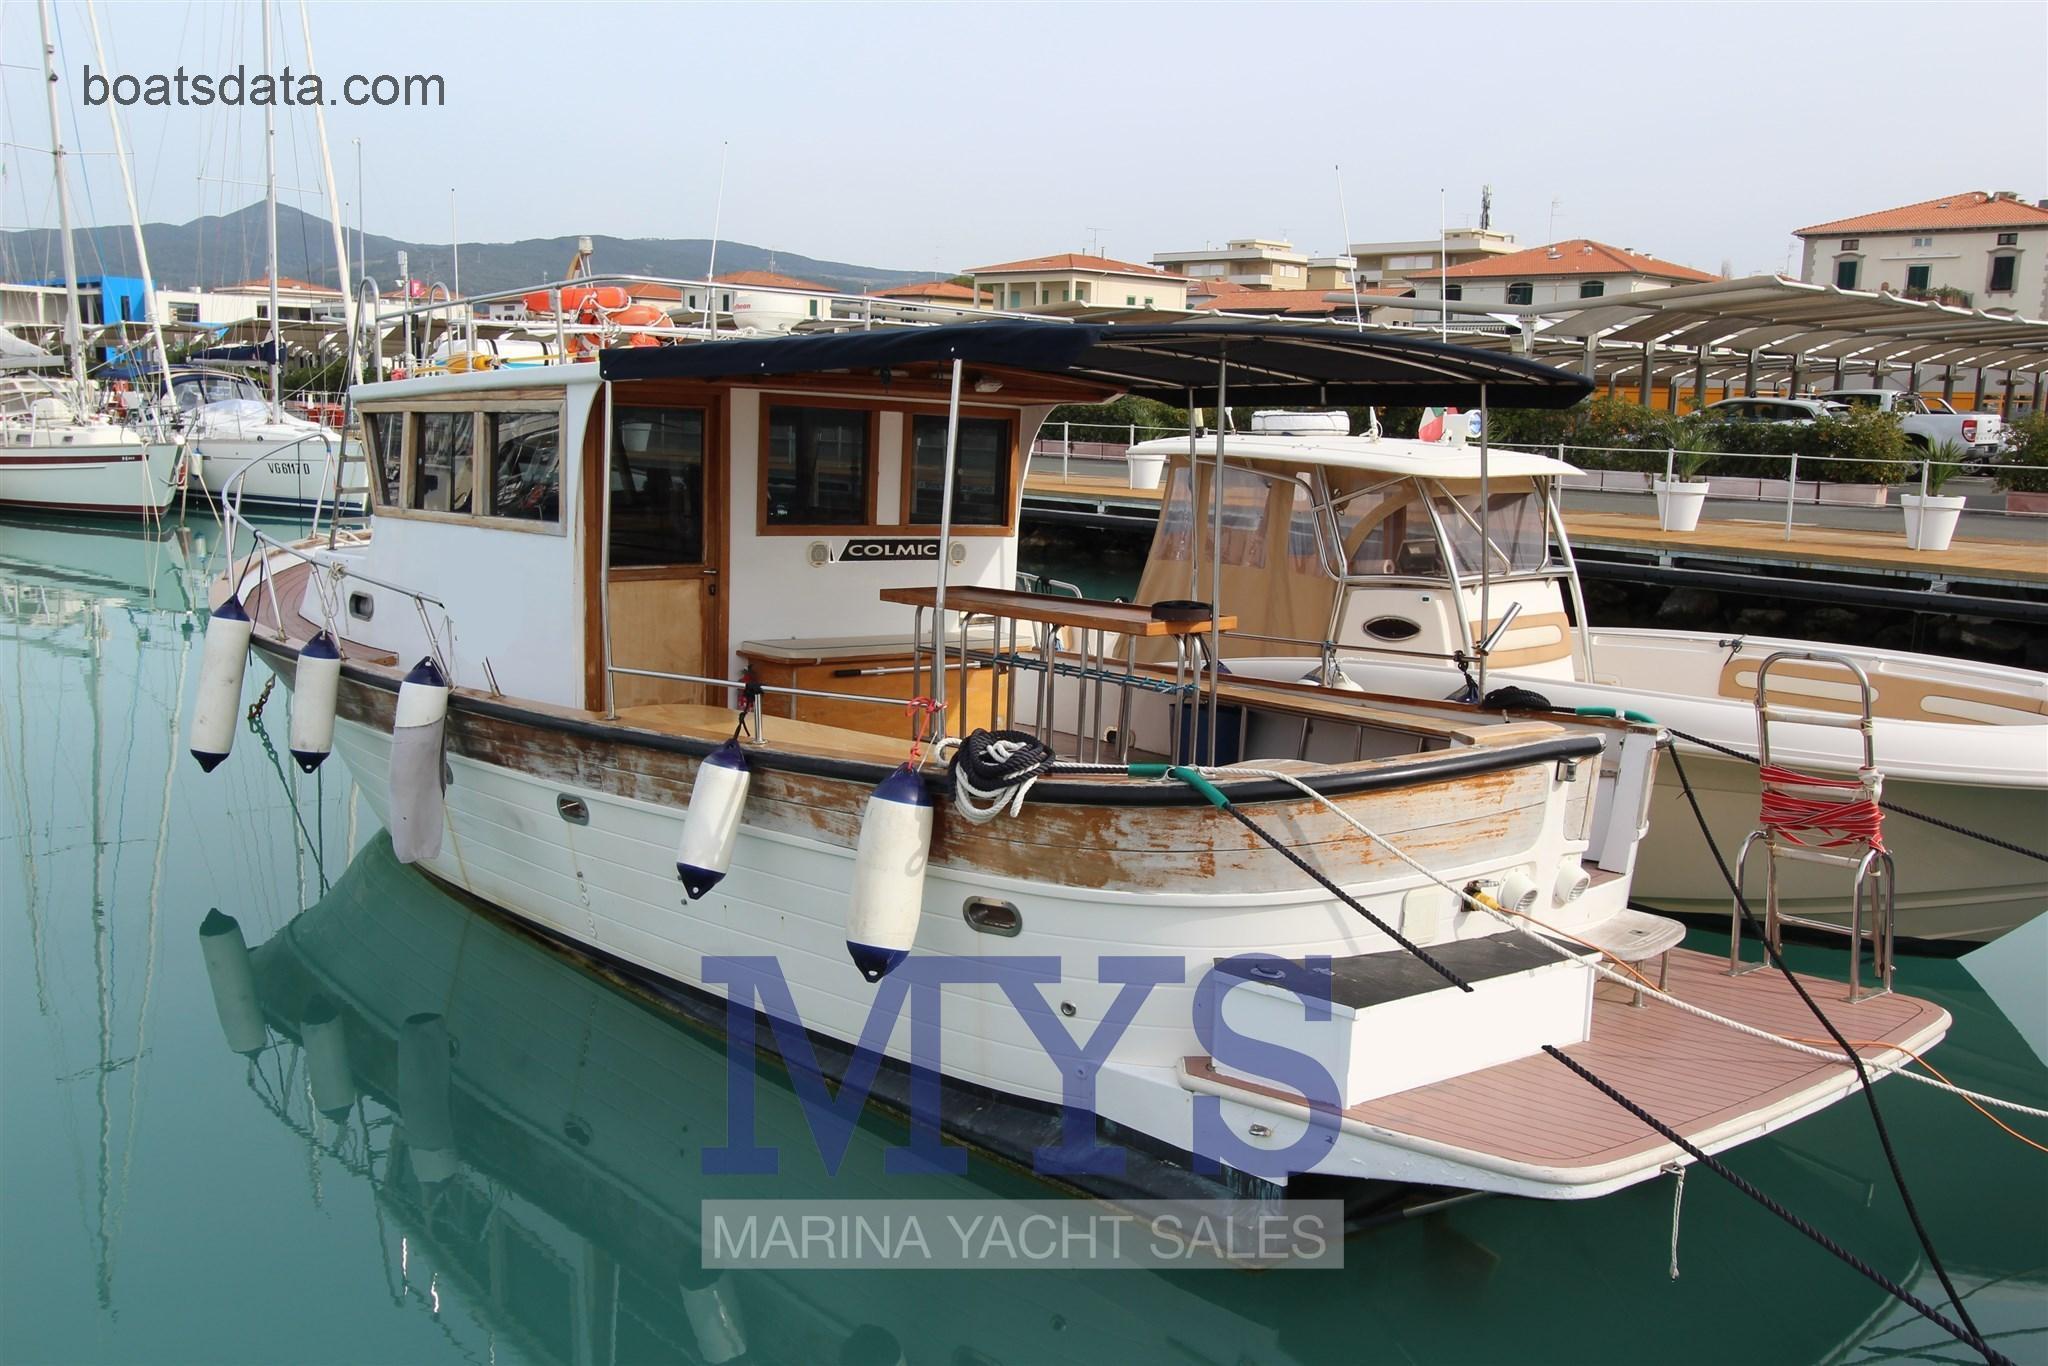 Custom Cantiere Navale Durazzo Francesco Gozzo tv detailed specifications and features